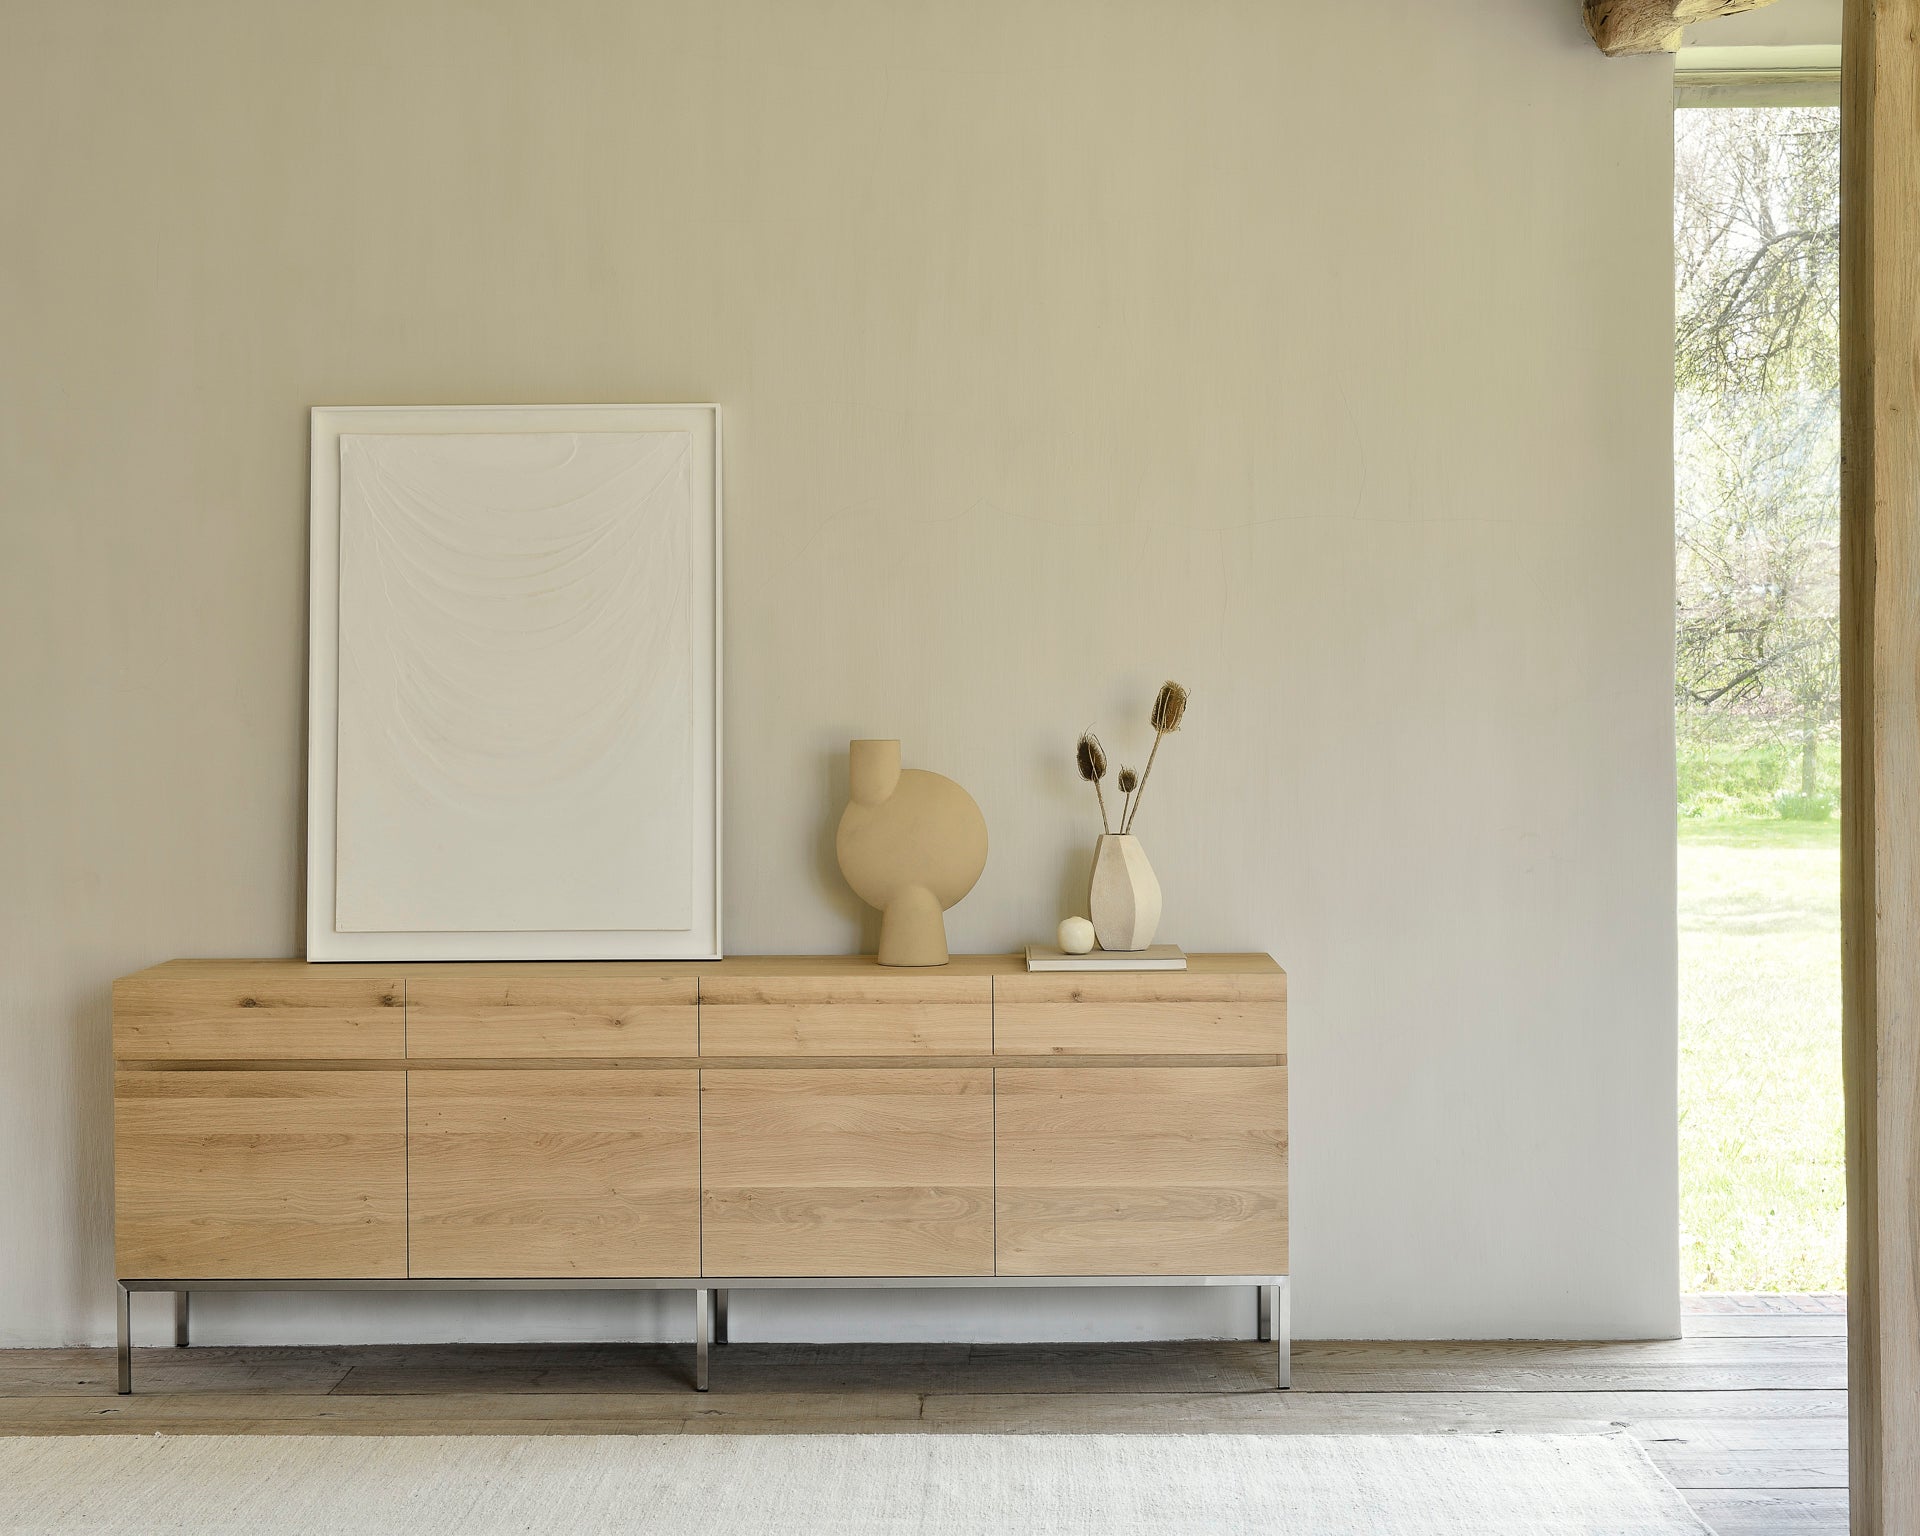 ligna sideboard by ethnicraft at adorn.house